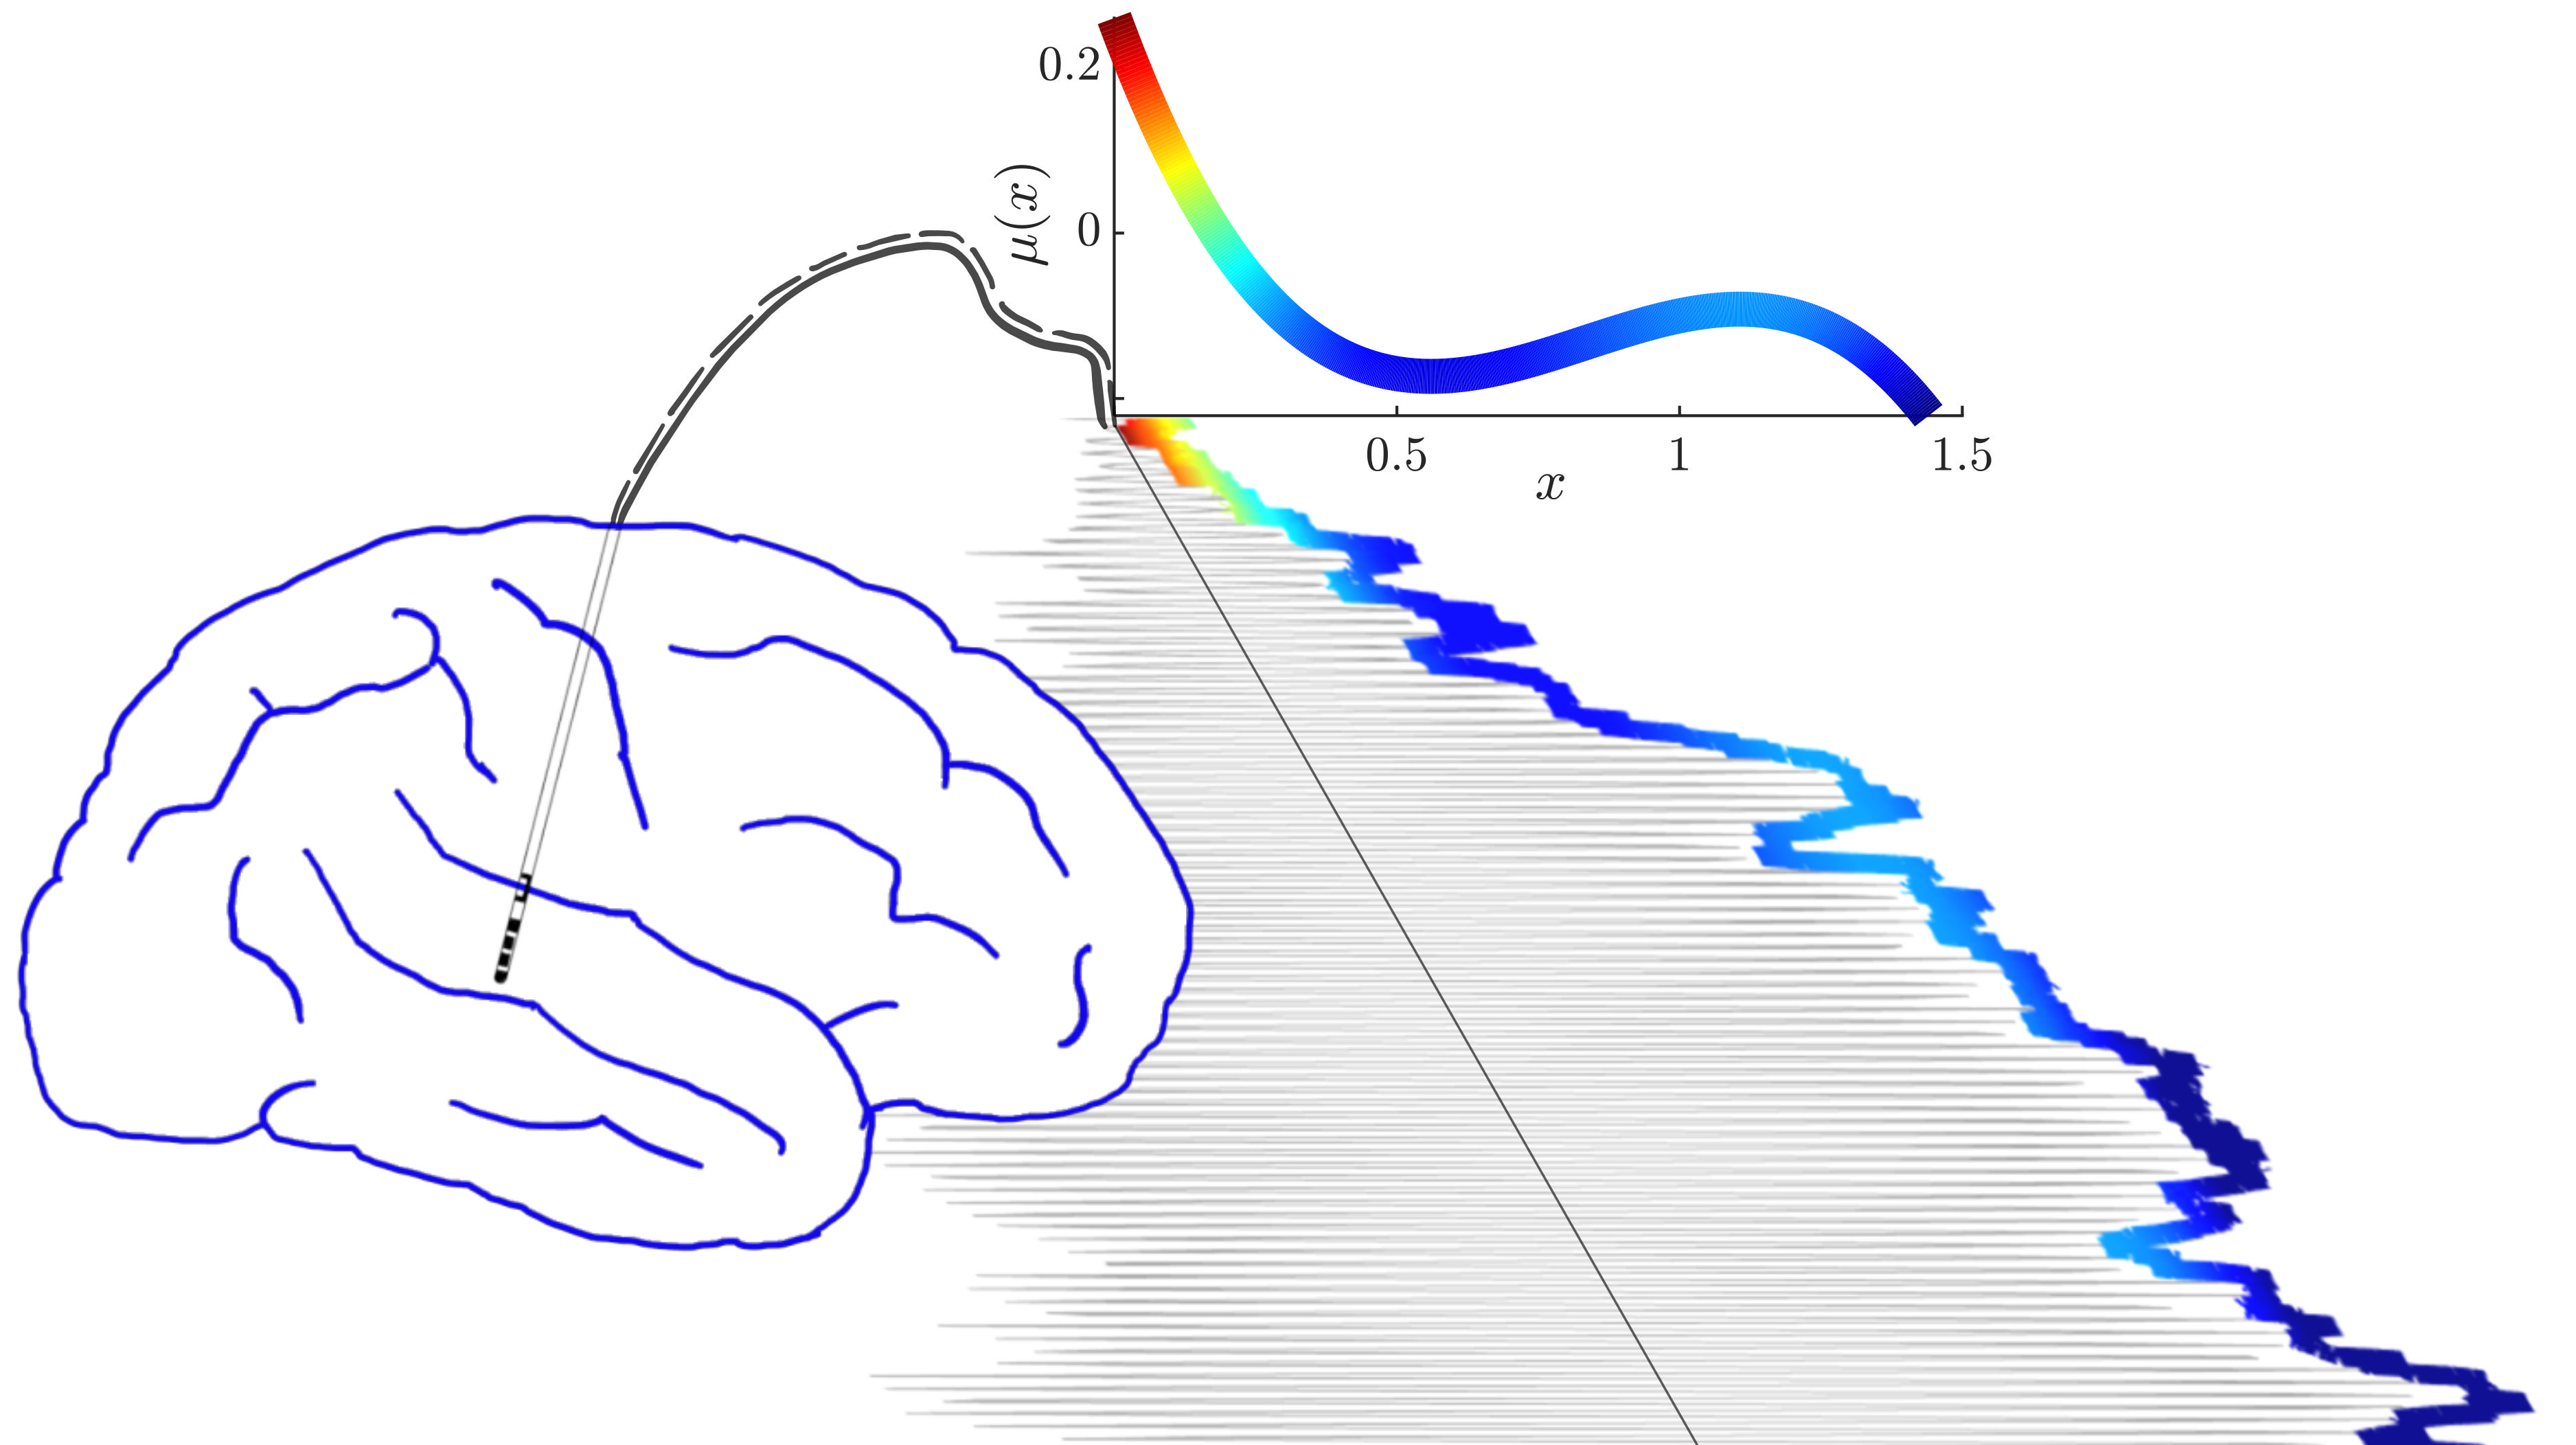 This figure shows a human brain with an implanted deep brain stimulation electrode and oscillatory activity recorded by the stimulation electrode. The figure highlights the relationship between the amplitude of the oscillatory activity and a curve which characterises the system generating the oscillatory activity and dictates which burst patterns can emerge. 